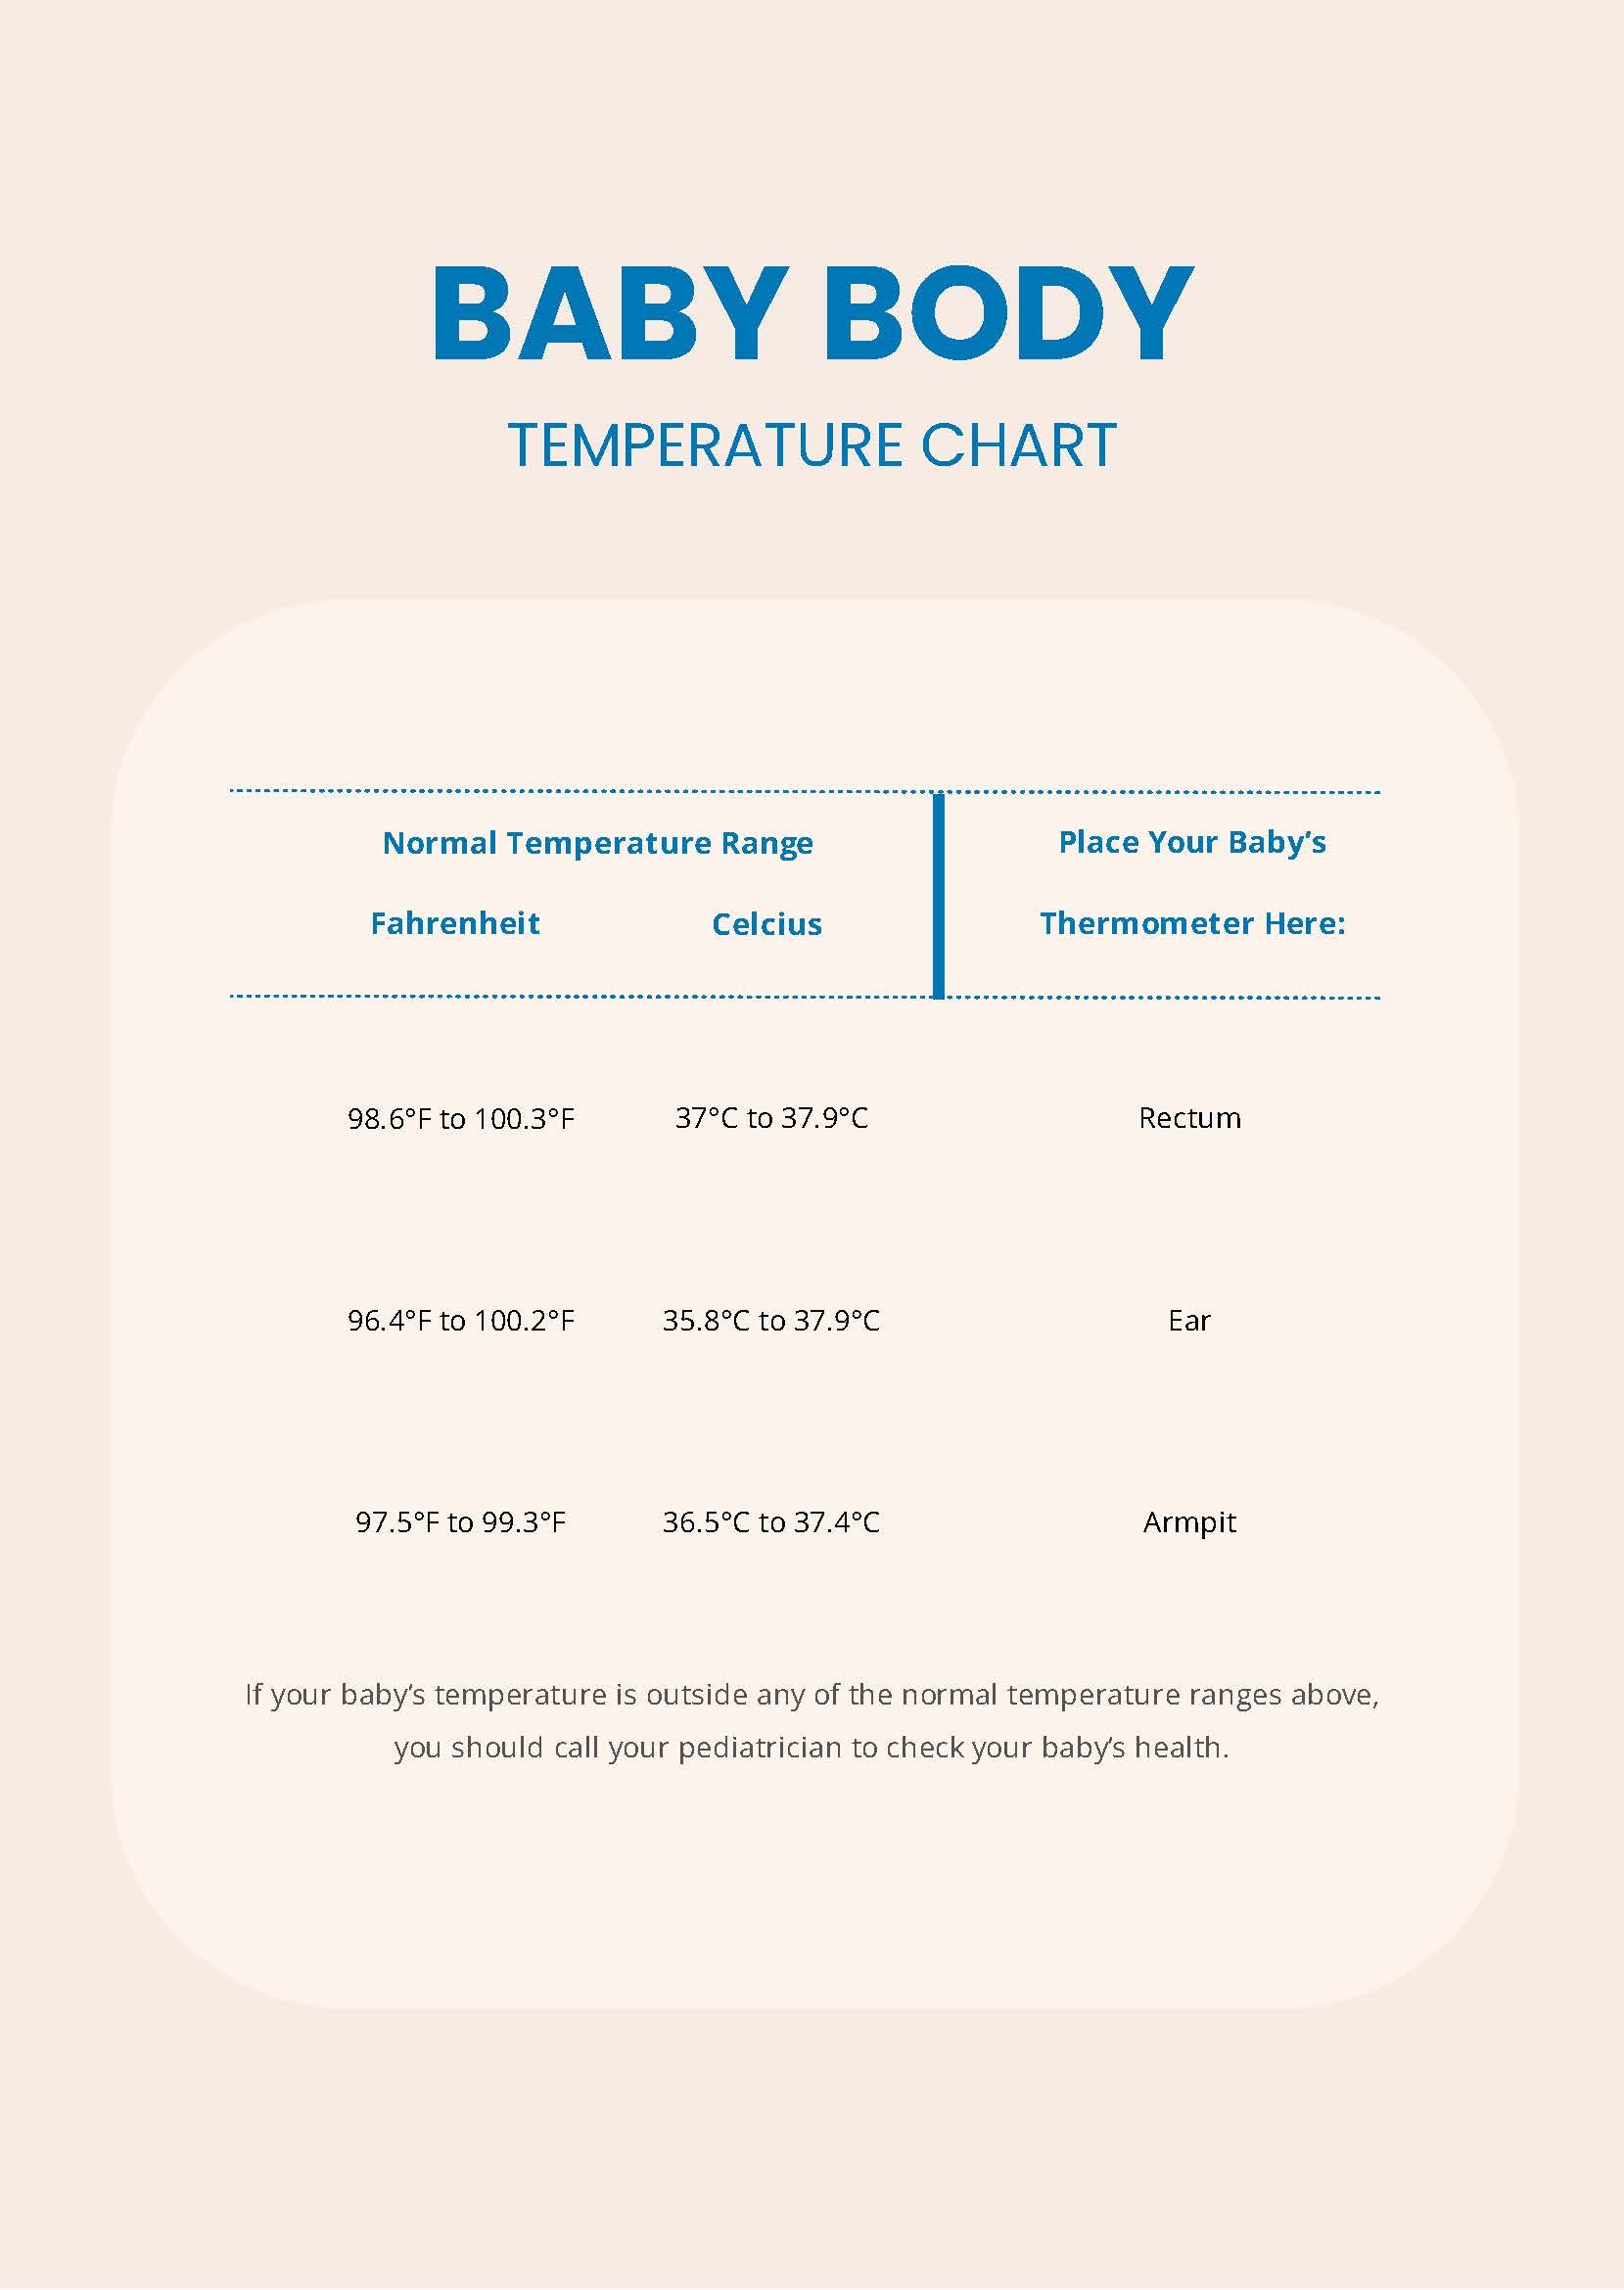 Baby Body Temperature Chart in PDF - Download